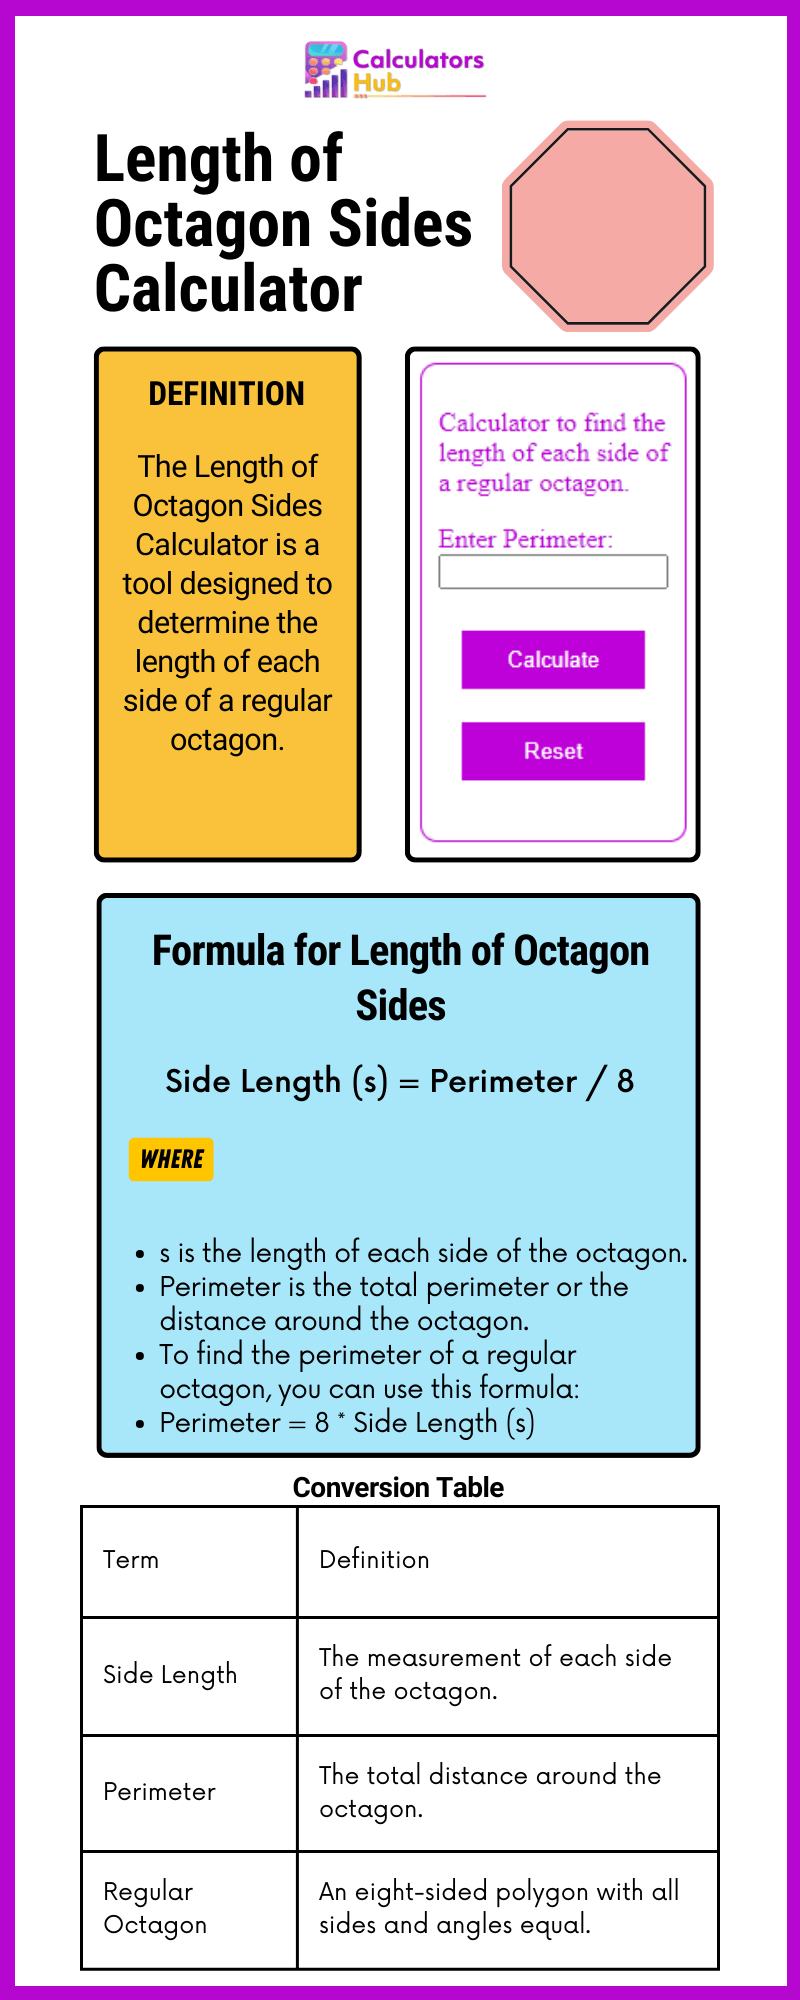 Length of Octagon Sides Calculator